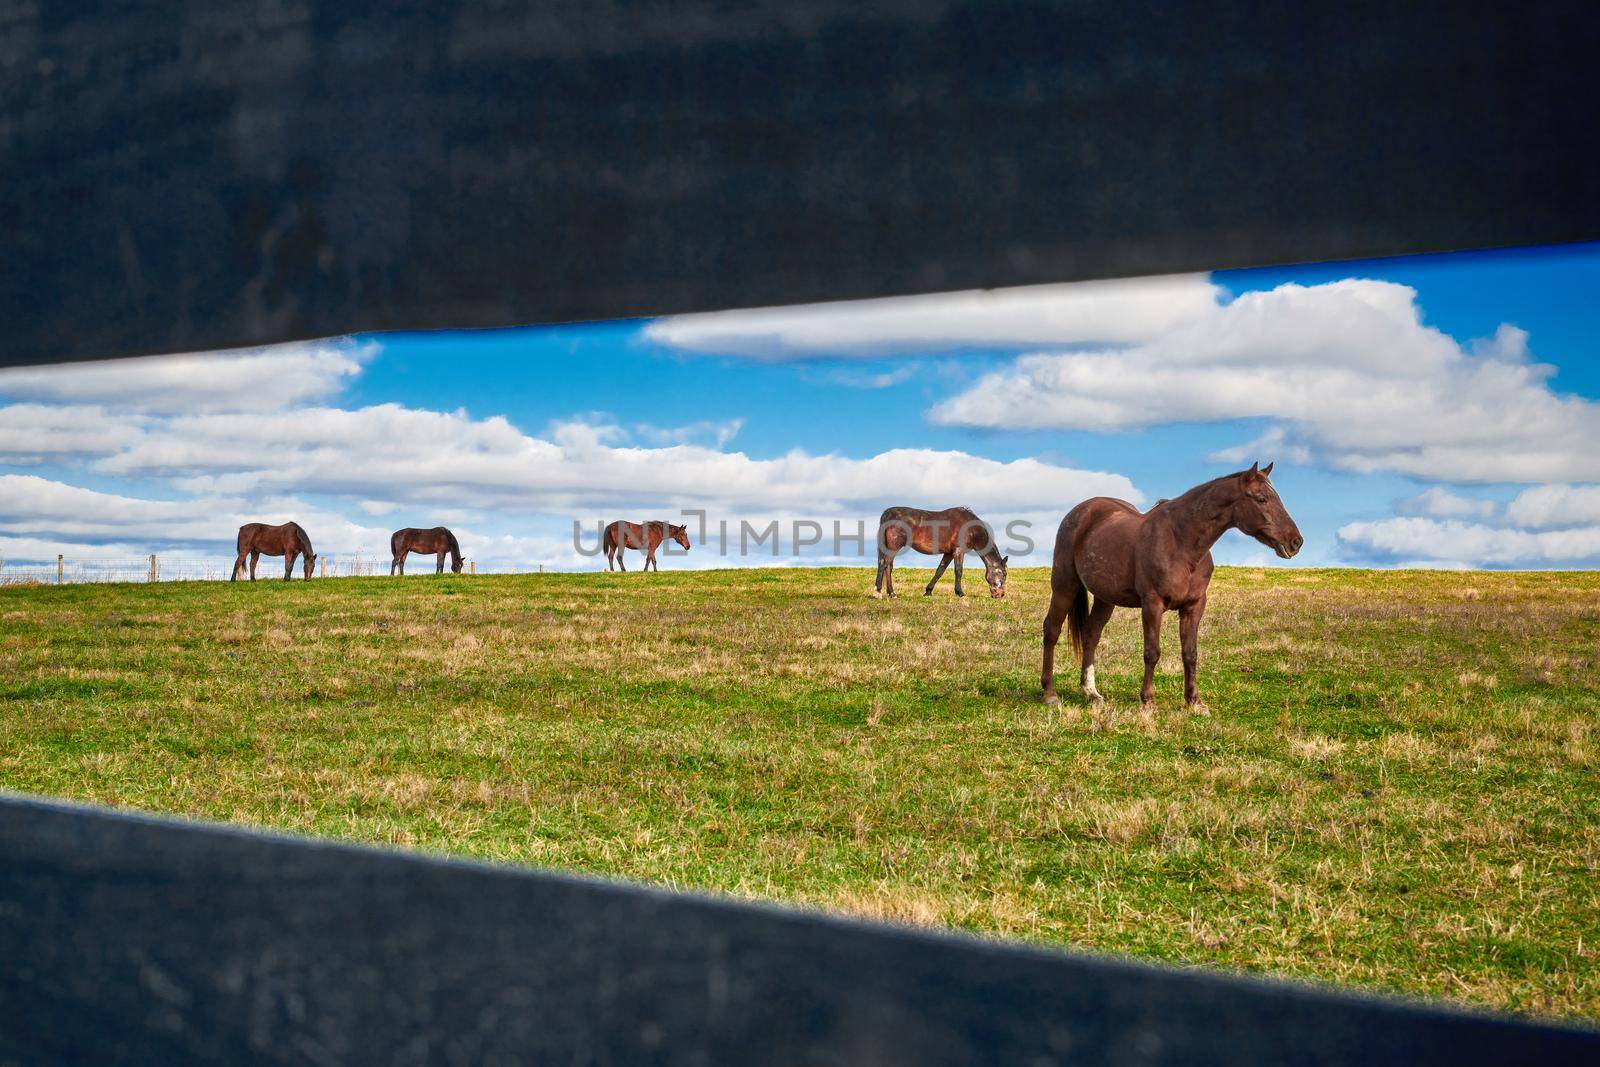 Horses grazing in a field seen through rail fence.